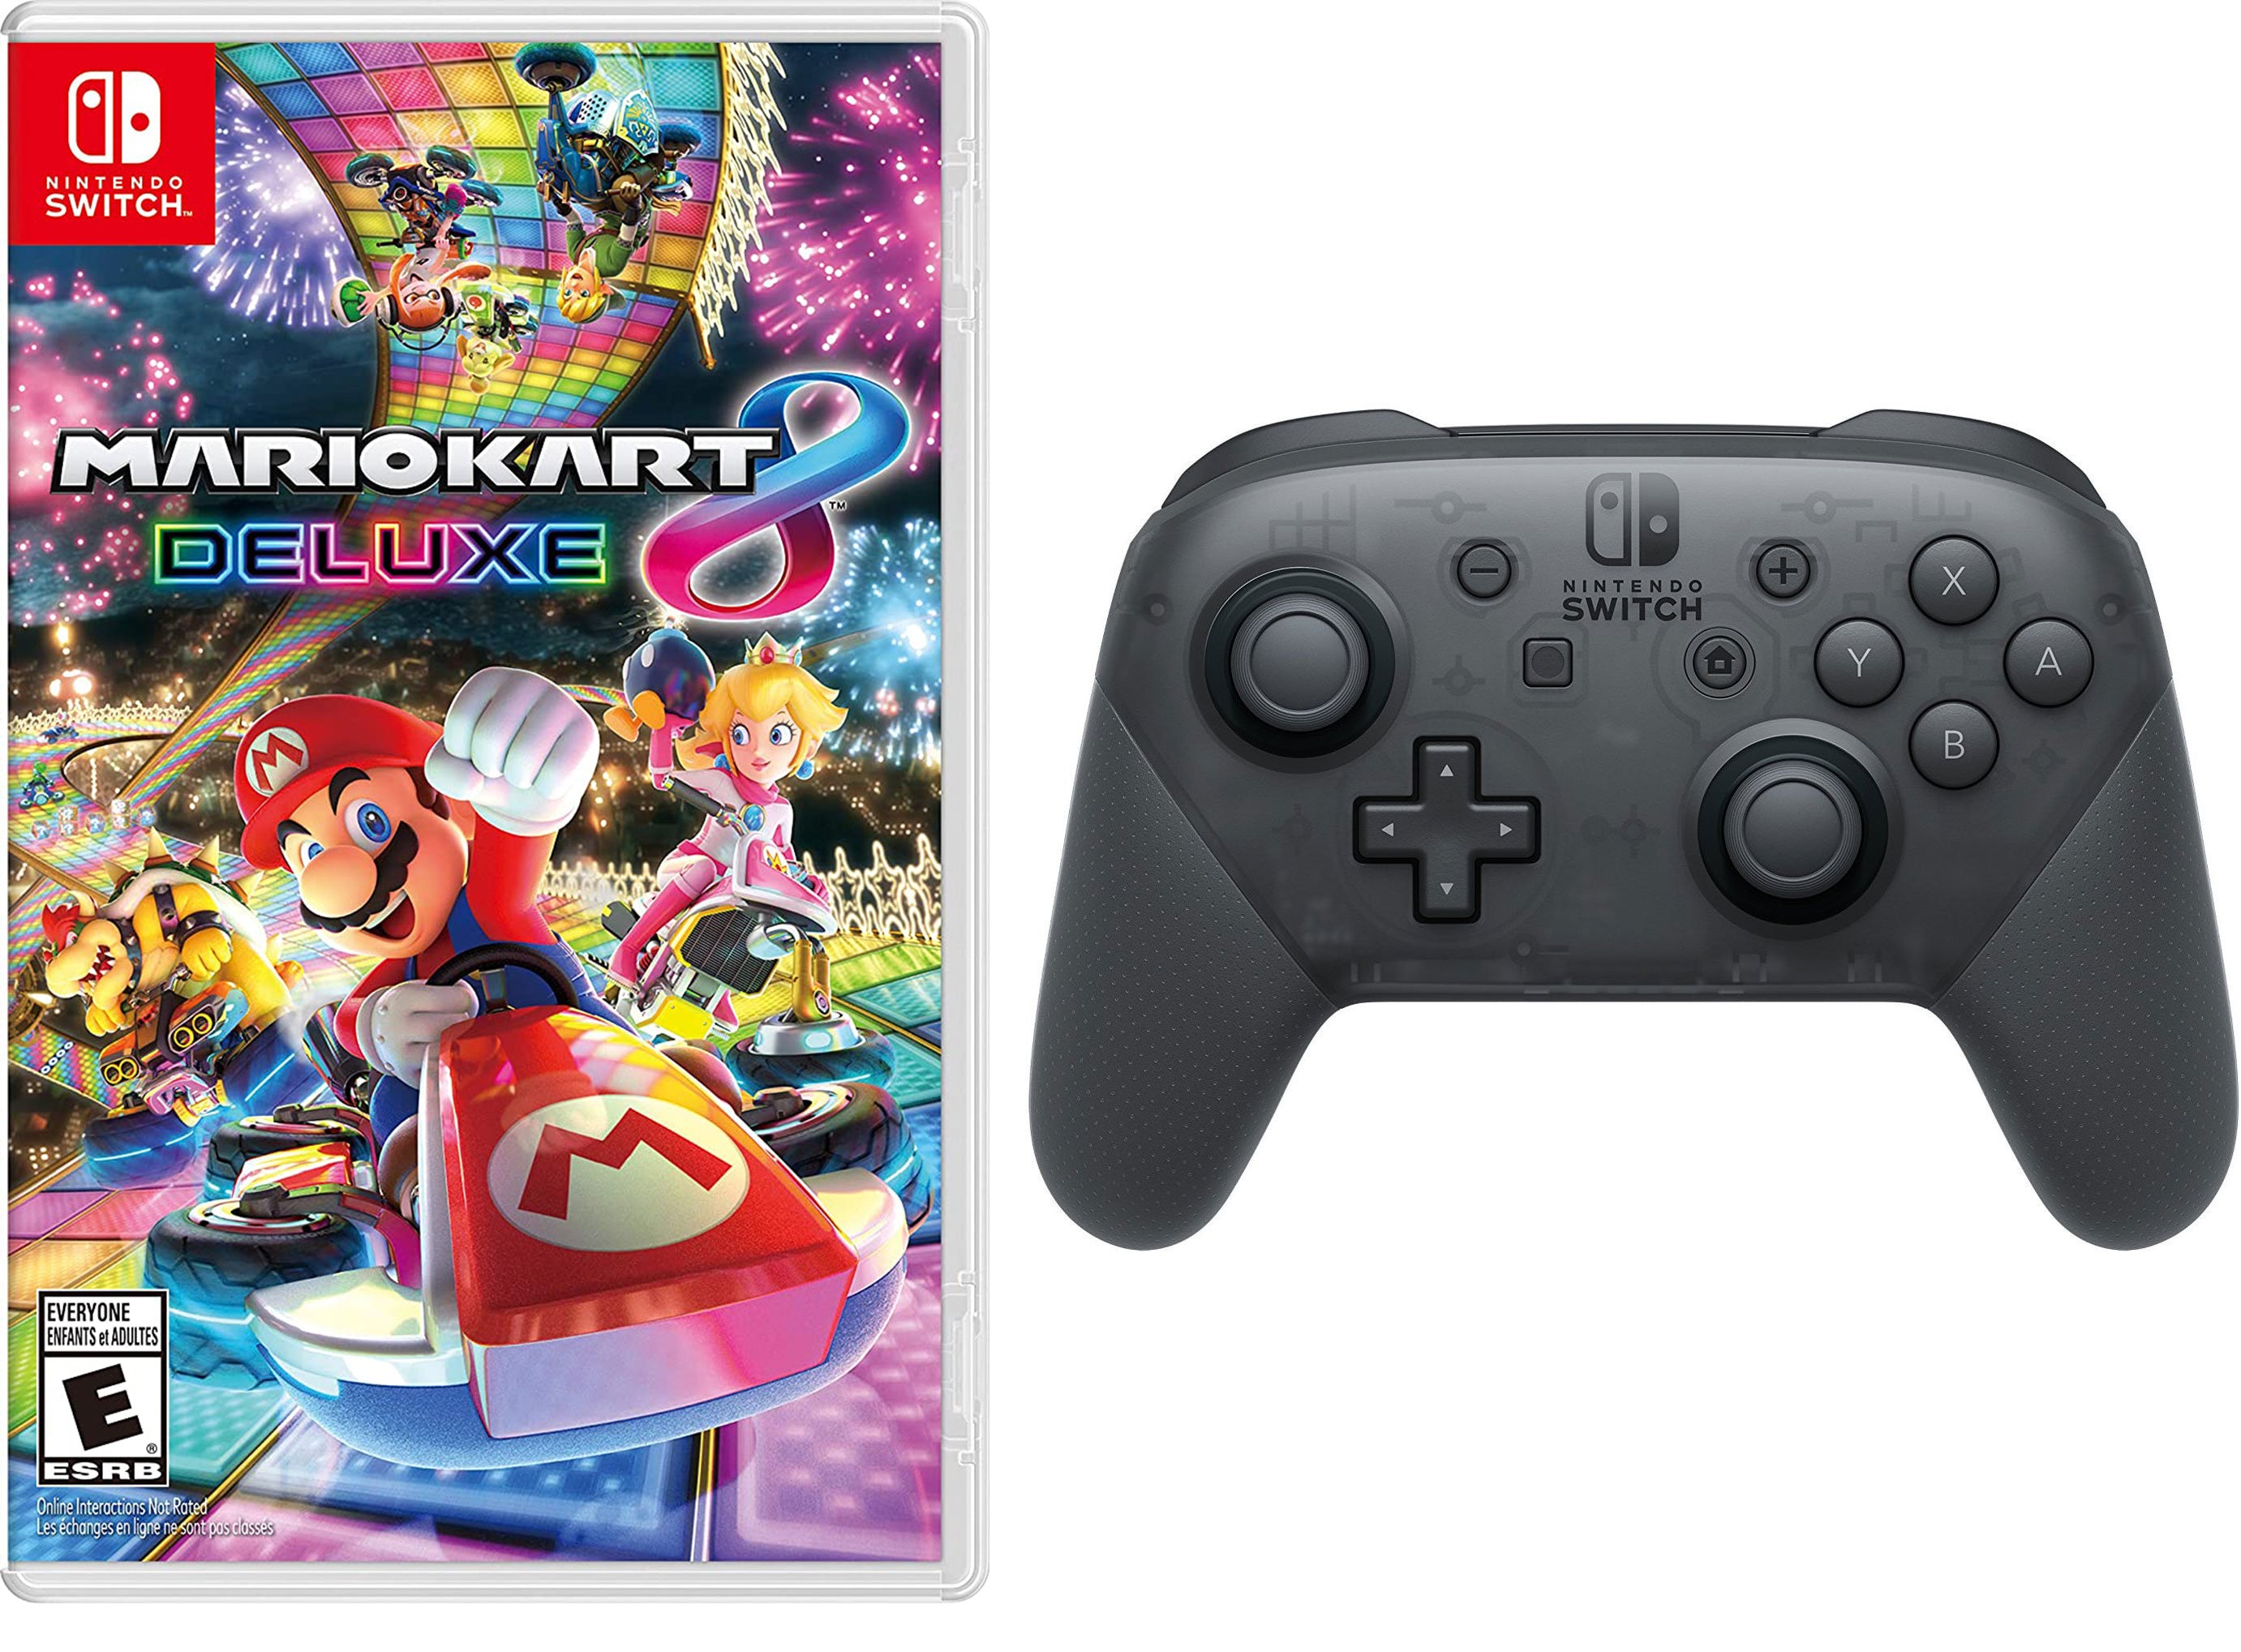 Mario Kart 8 Deluxe Nintendo Switch and Pro Controller - Pro-Distributing